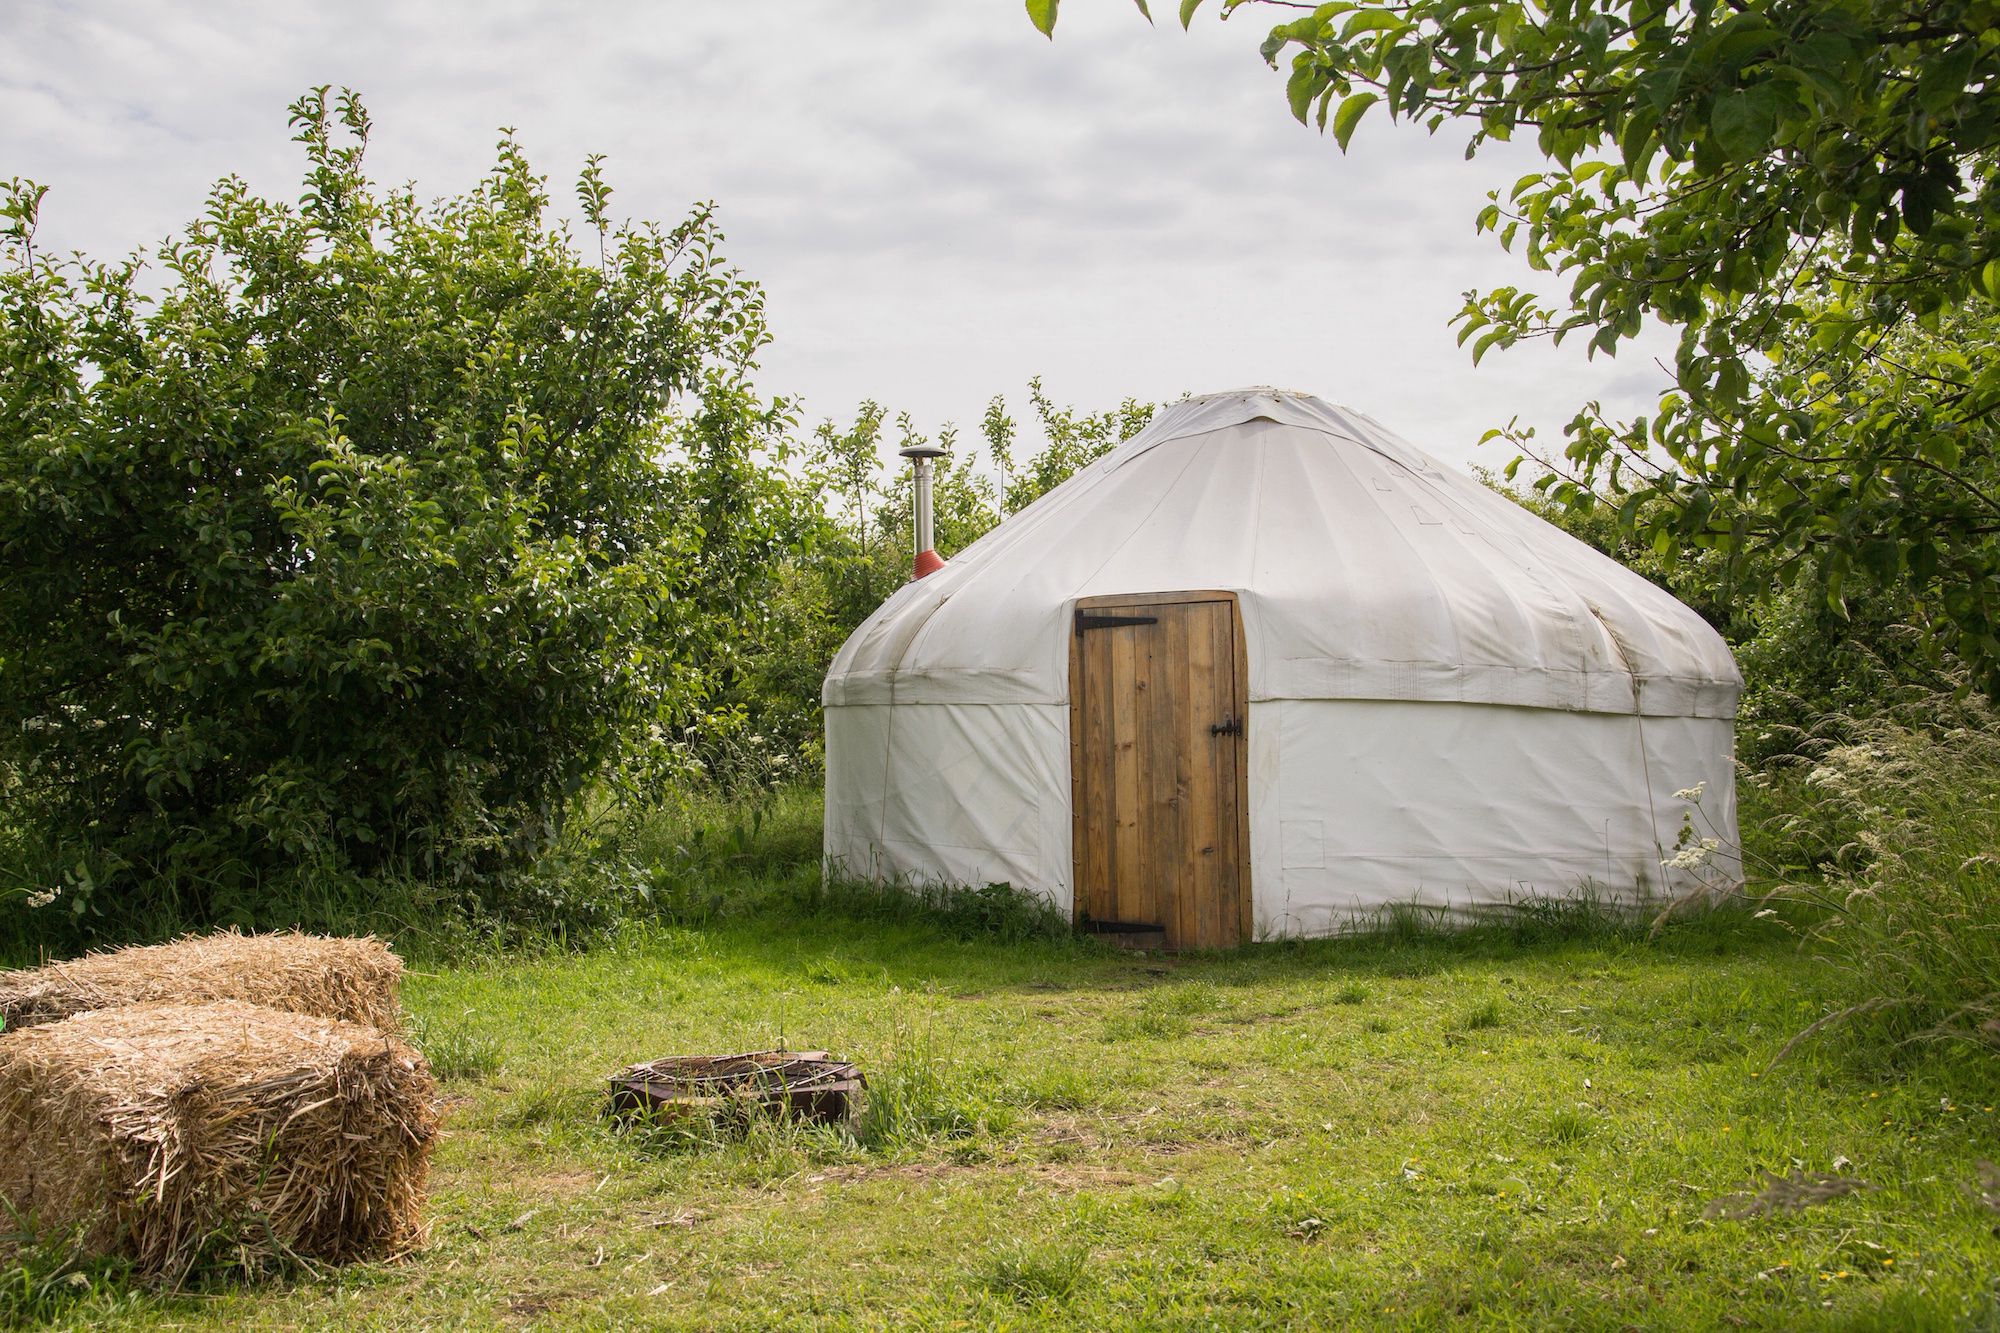 Our Most Popular Glamping & Luxury Camping Sites